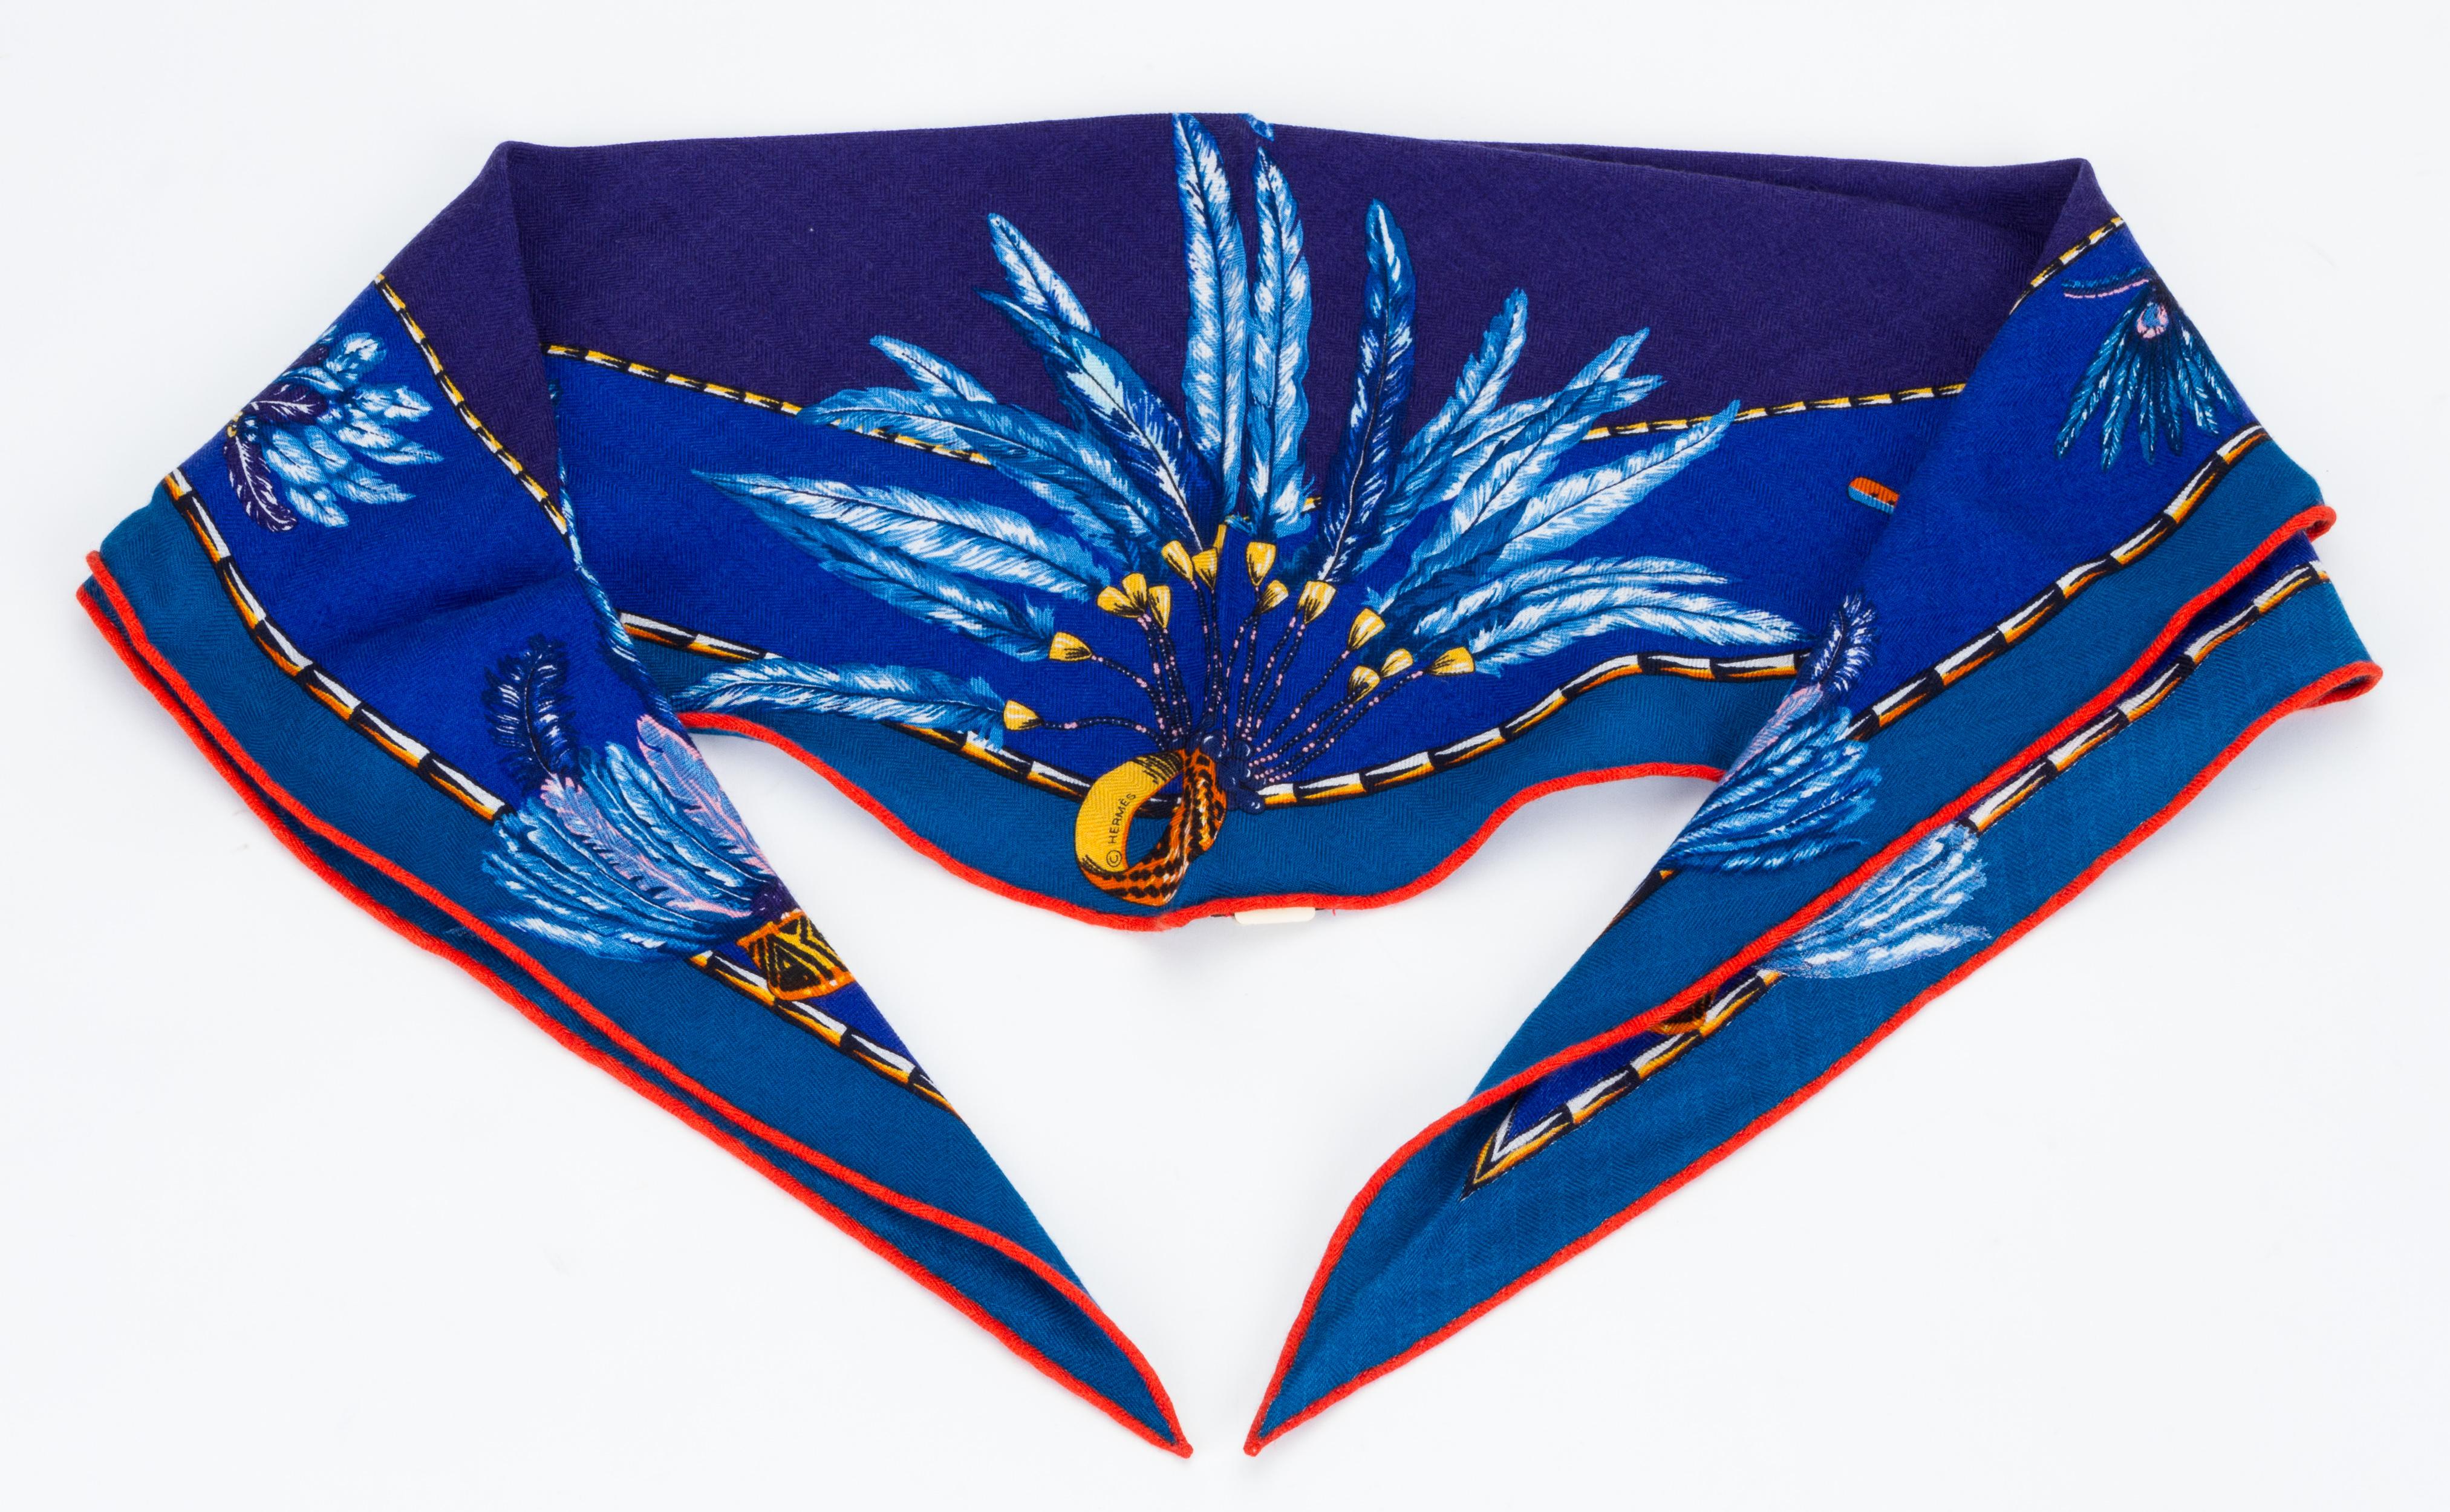 Hermès blue silk-and-cashmere Brazil print losange MM scarf. Brand new condition with tags.